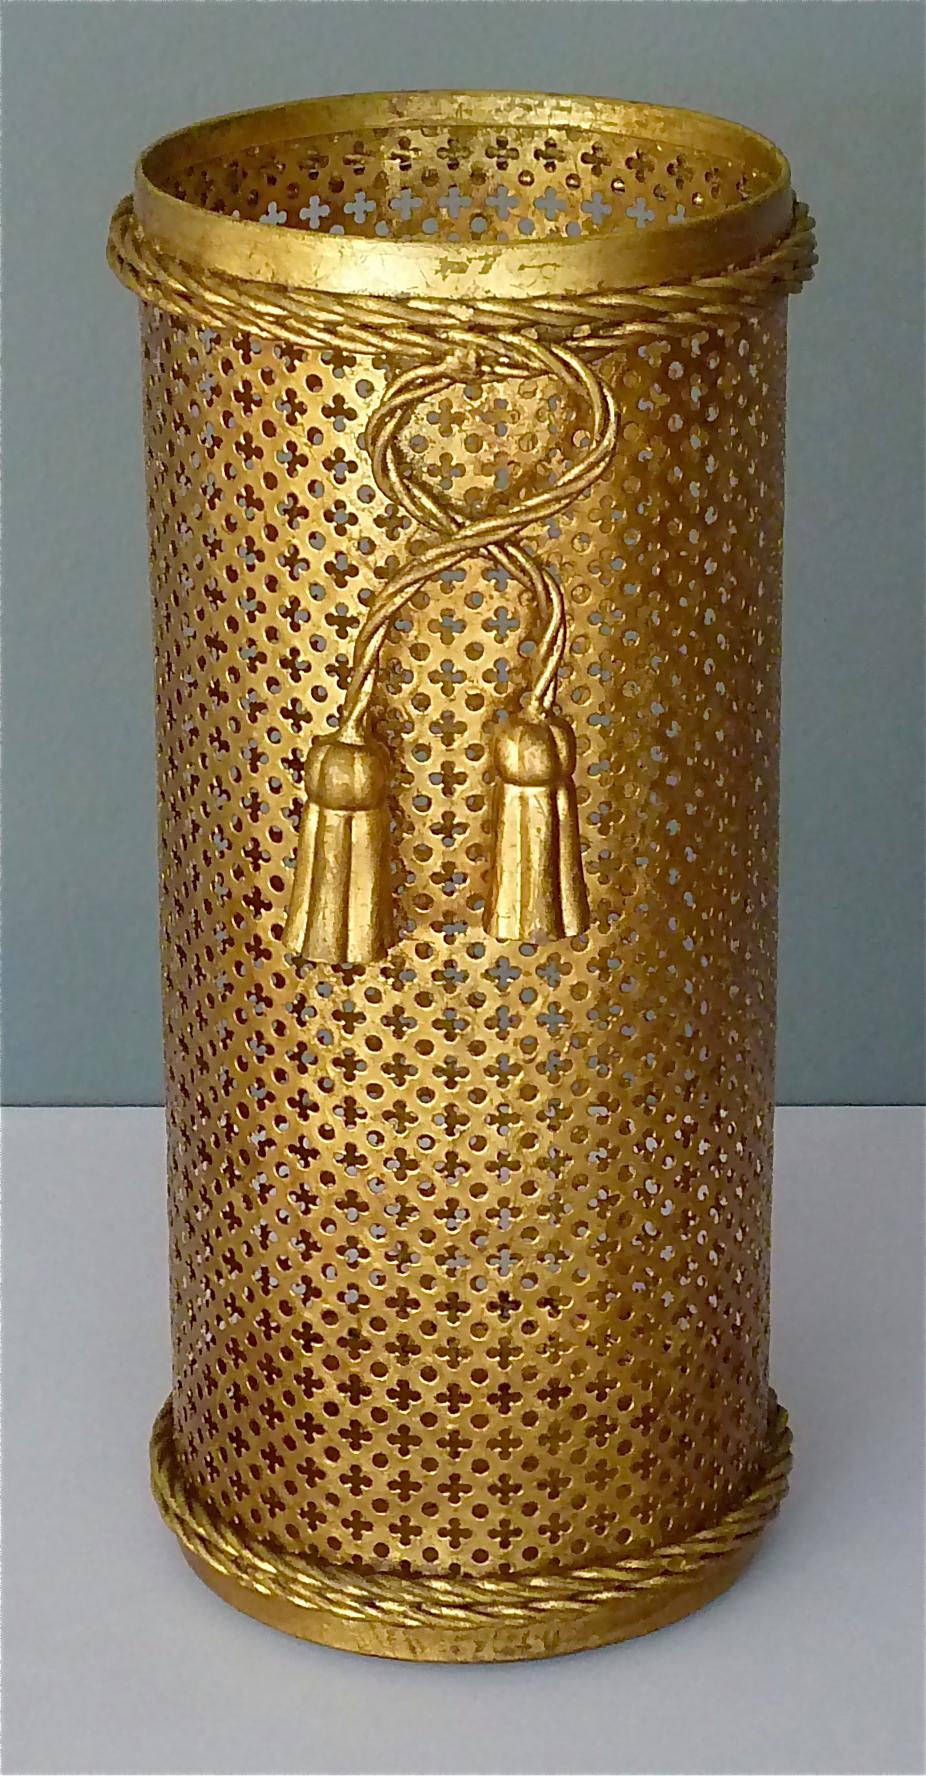 Italian Midcentury Umbrella Stand Gilt Perforated Metal, Hans Kögl Style, 1950s For Sale 3